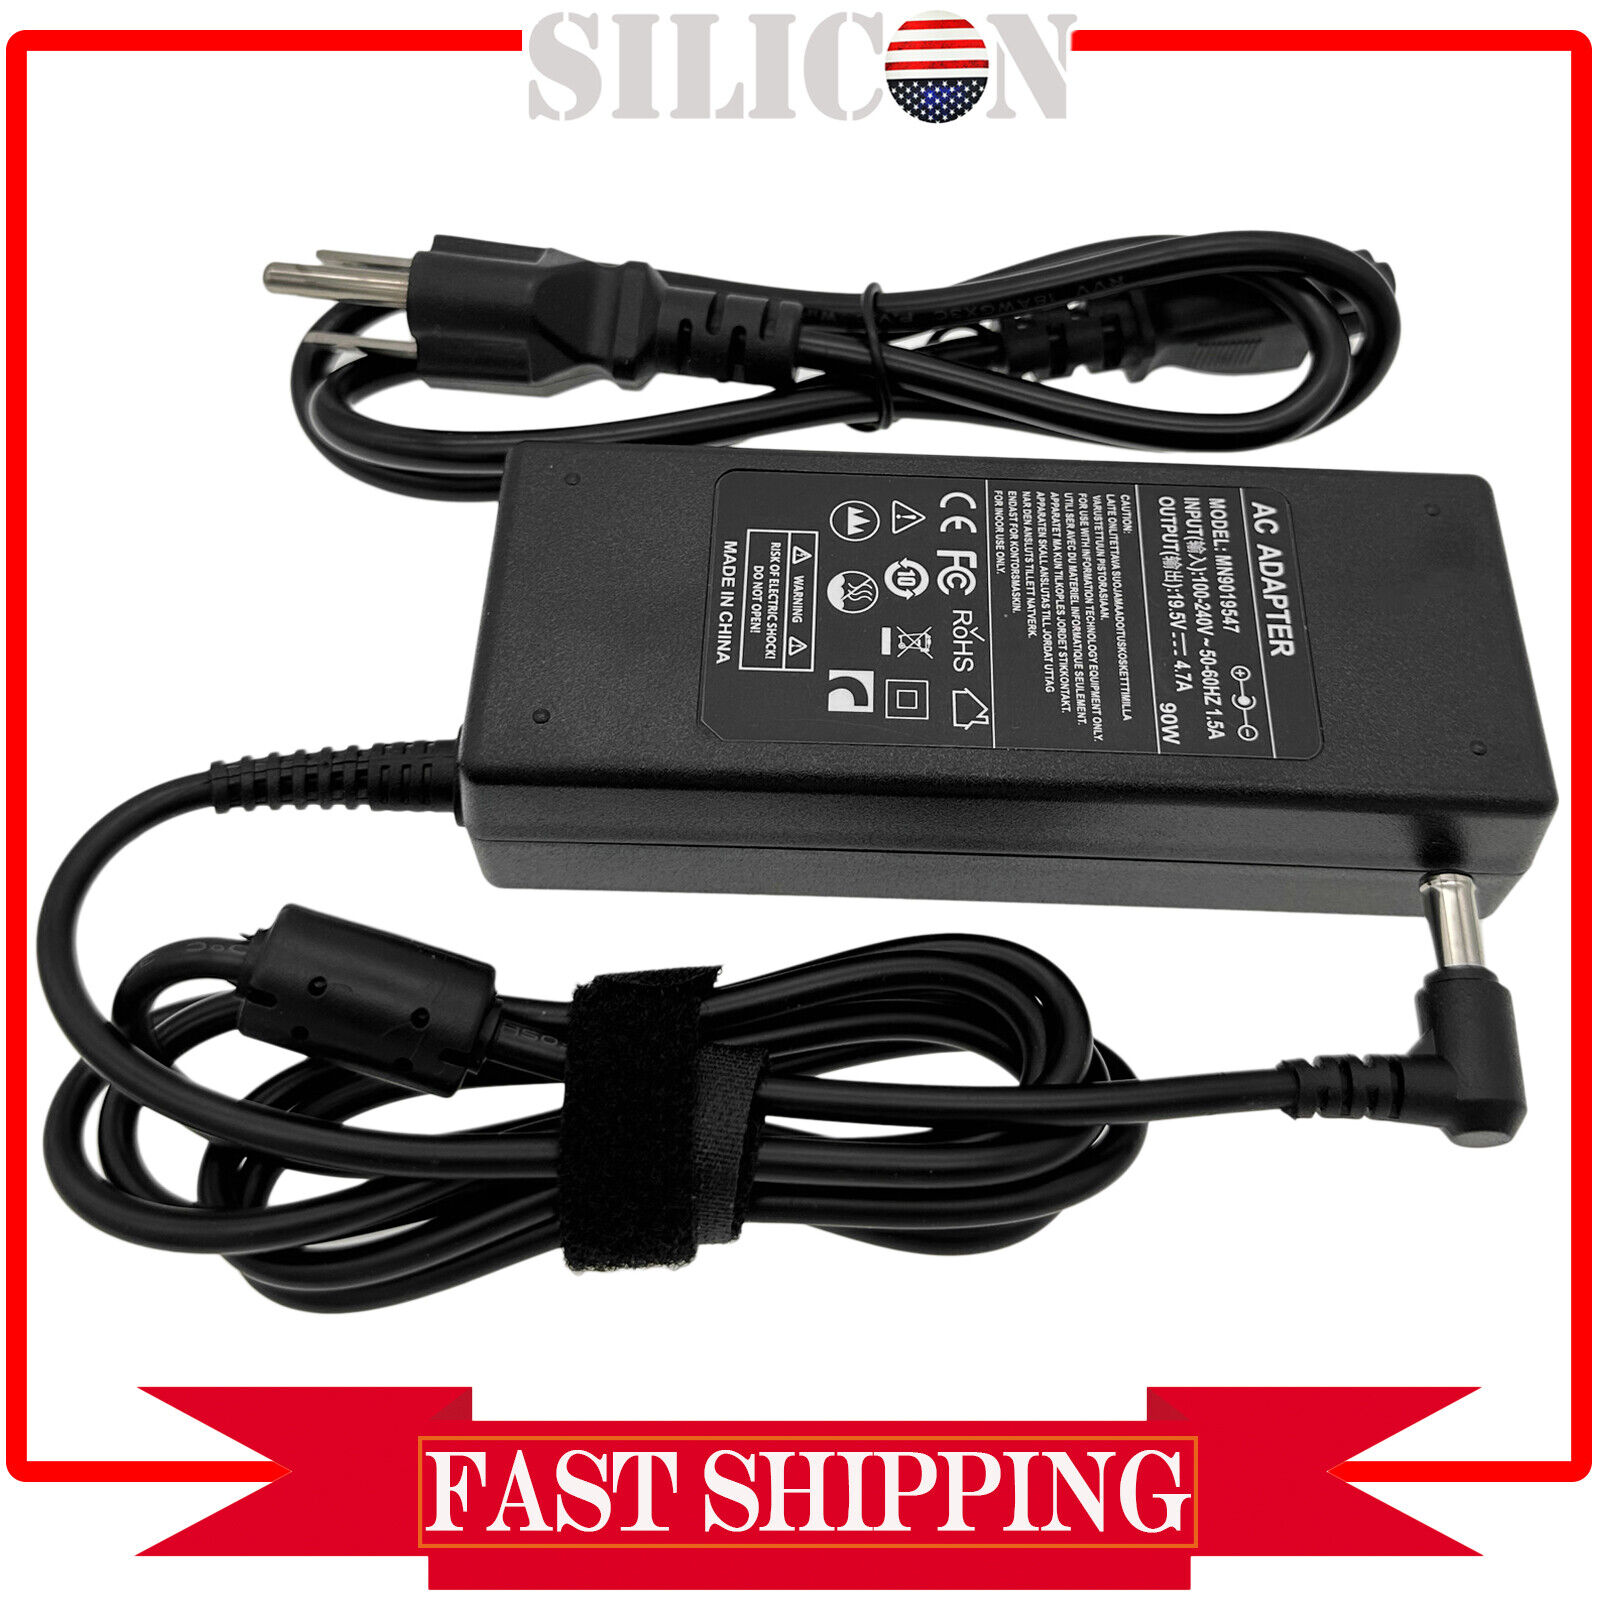 19.5V 4.7A 90W AC Power Adapter Charger for Sony Vaio Series PCG-3J1L PCG-7Y2L